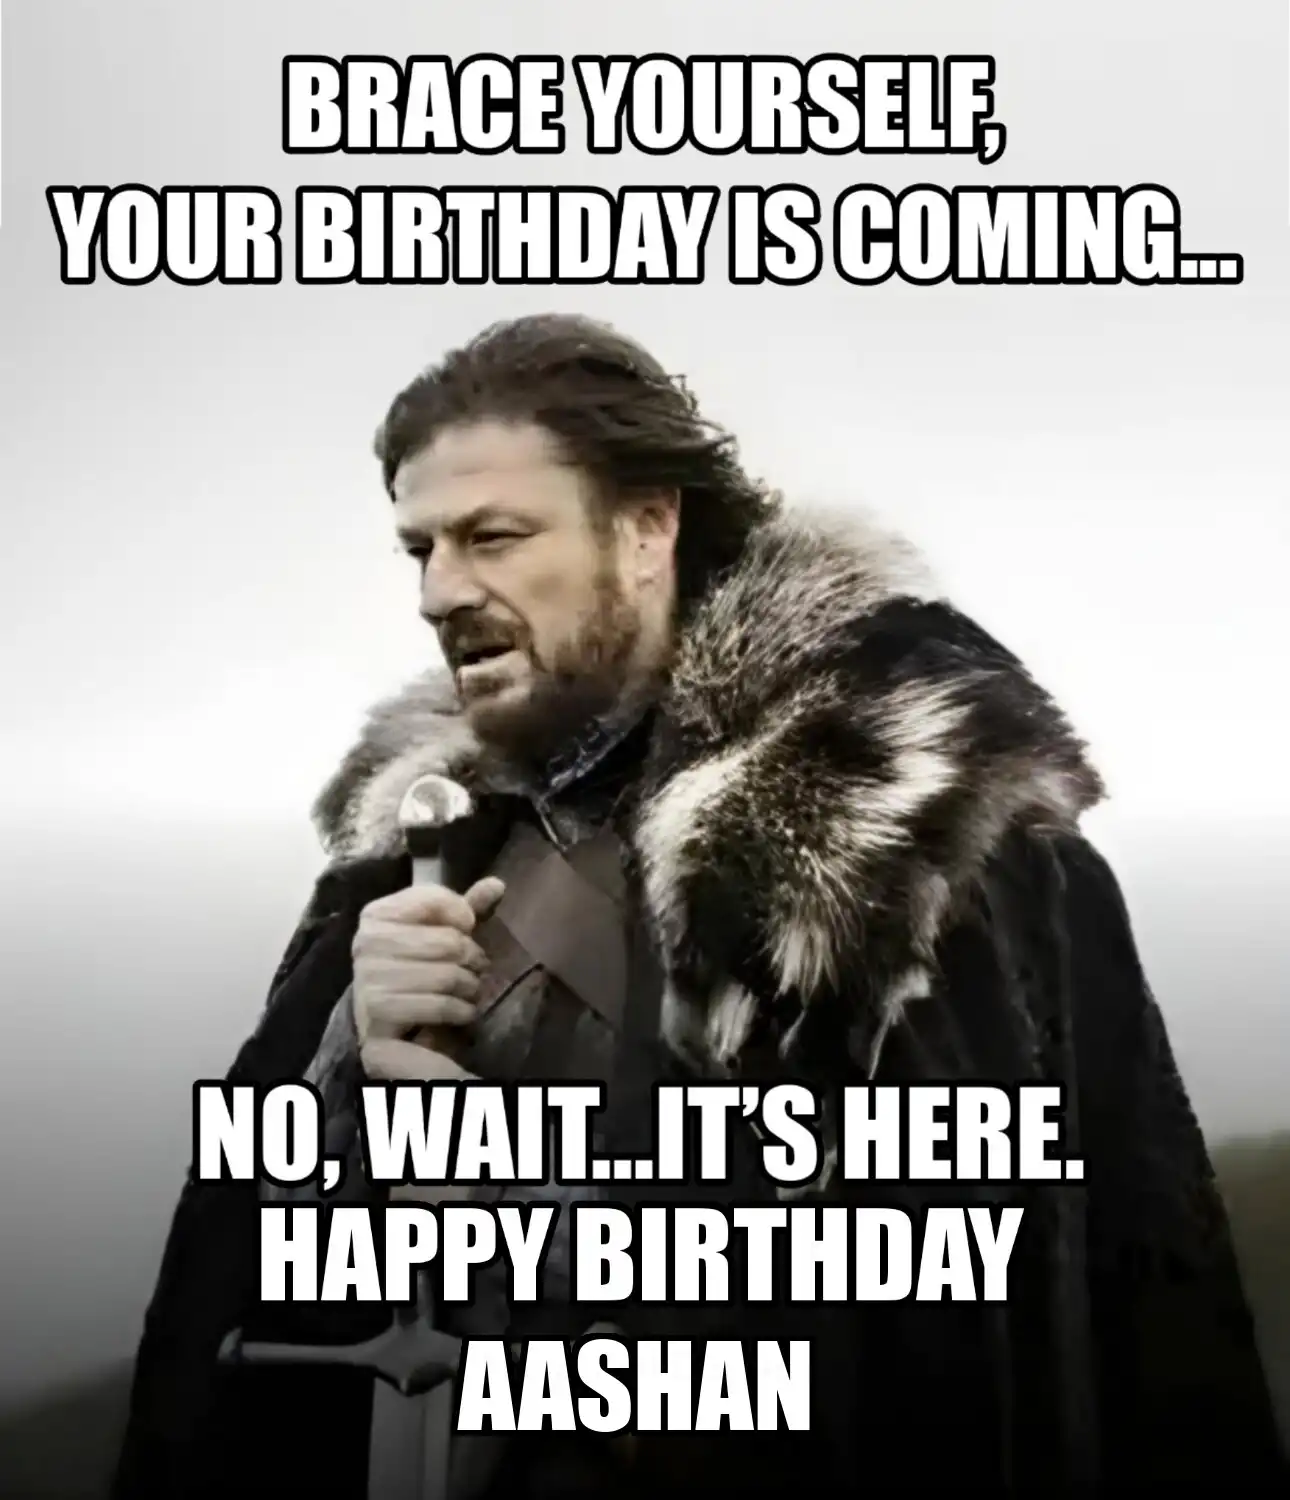 Happy Birthday Aashan Brace Yourself Your Birthday Is Coming Meme